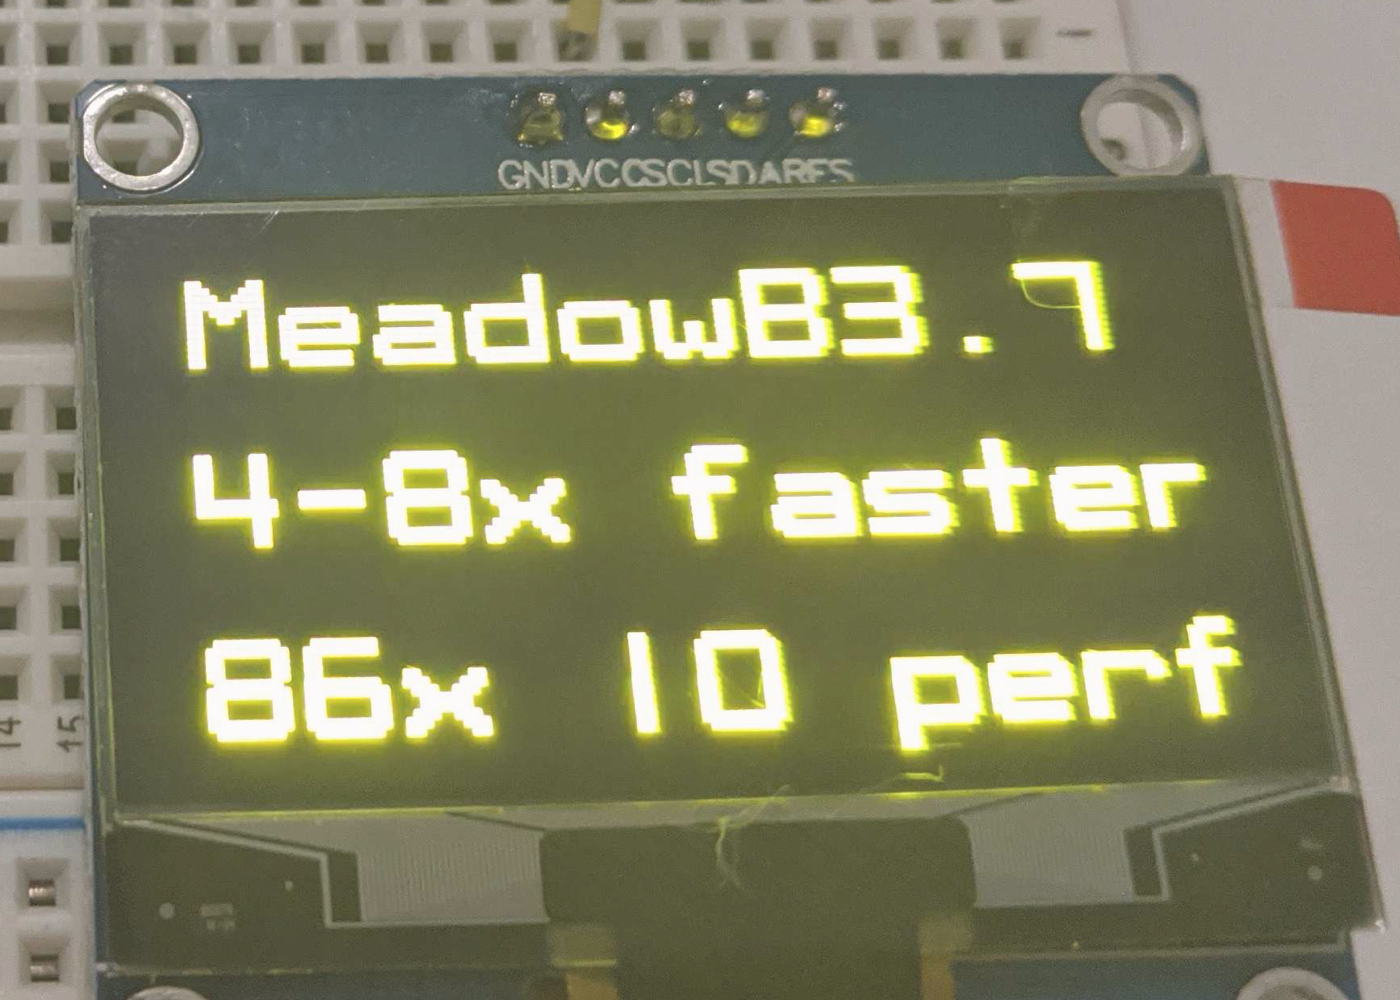 Meadow b3.7; 4-8x faster MCU processing, and 86x faster IO performance.